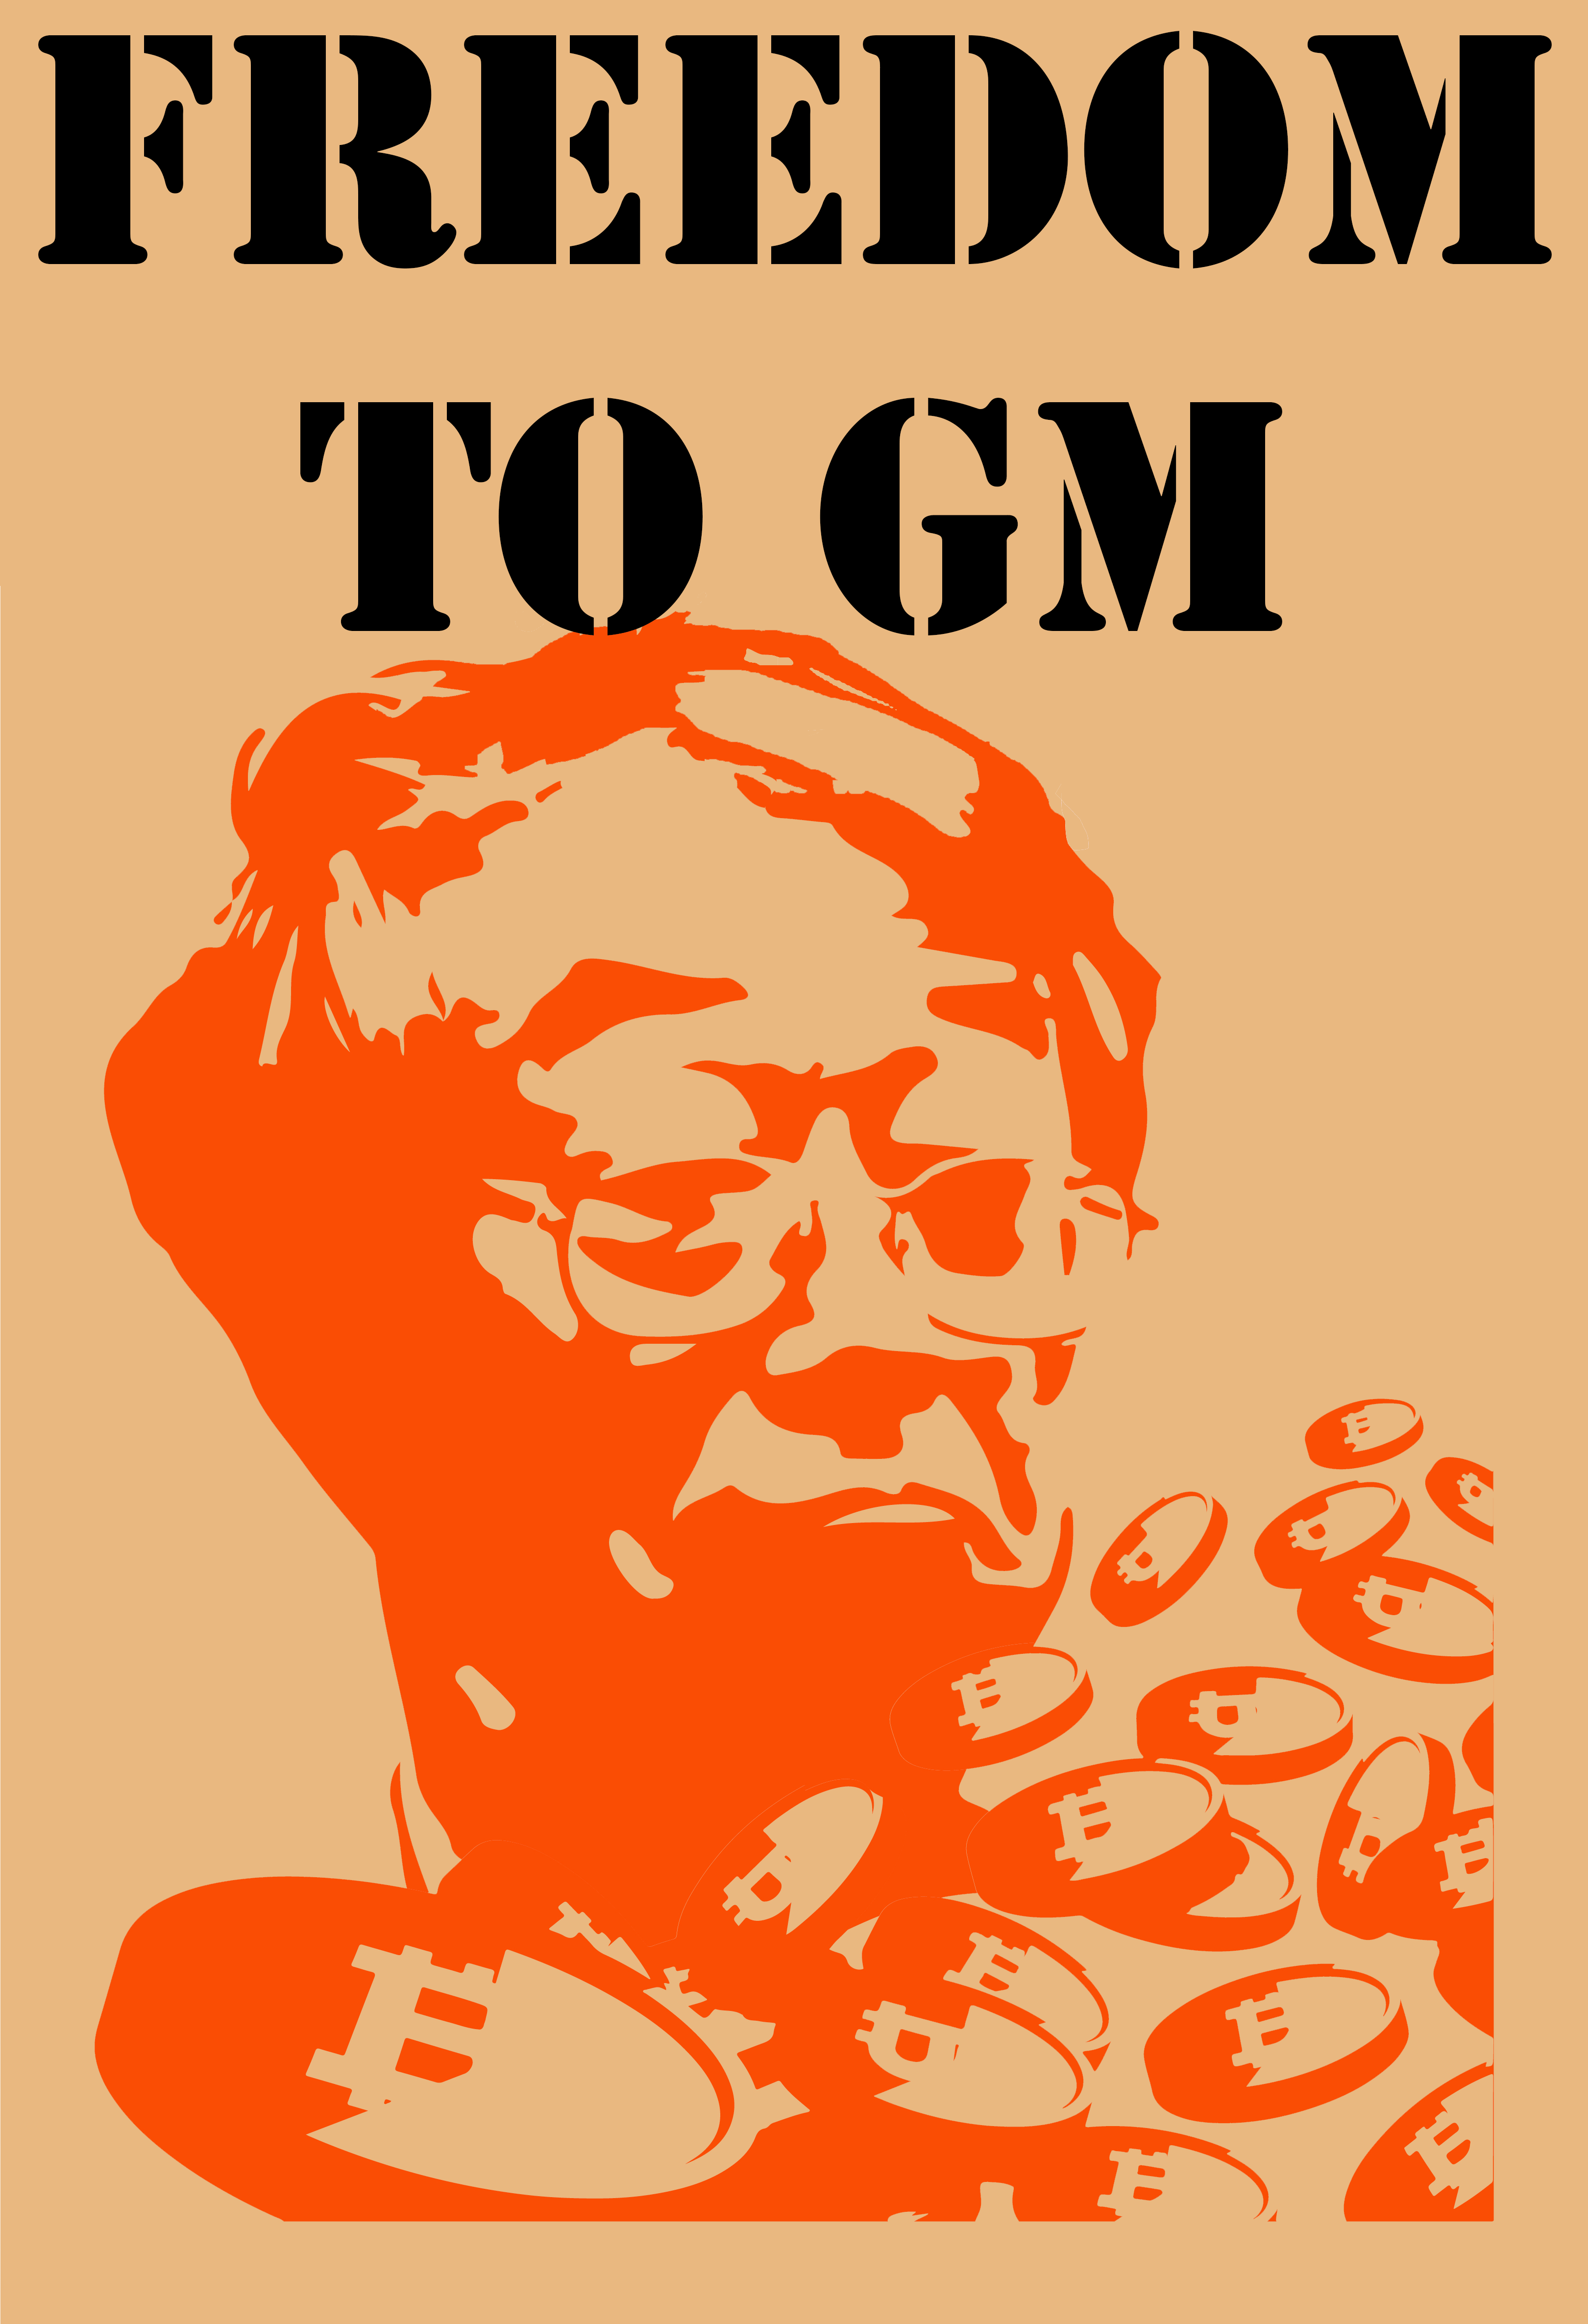 Freedom to gmgn #3/300